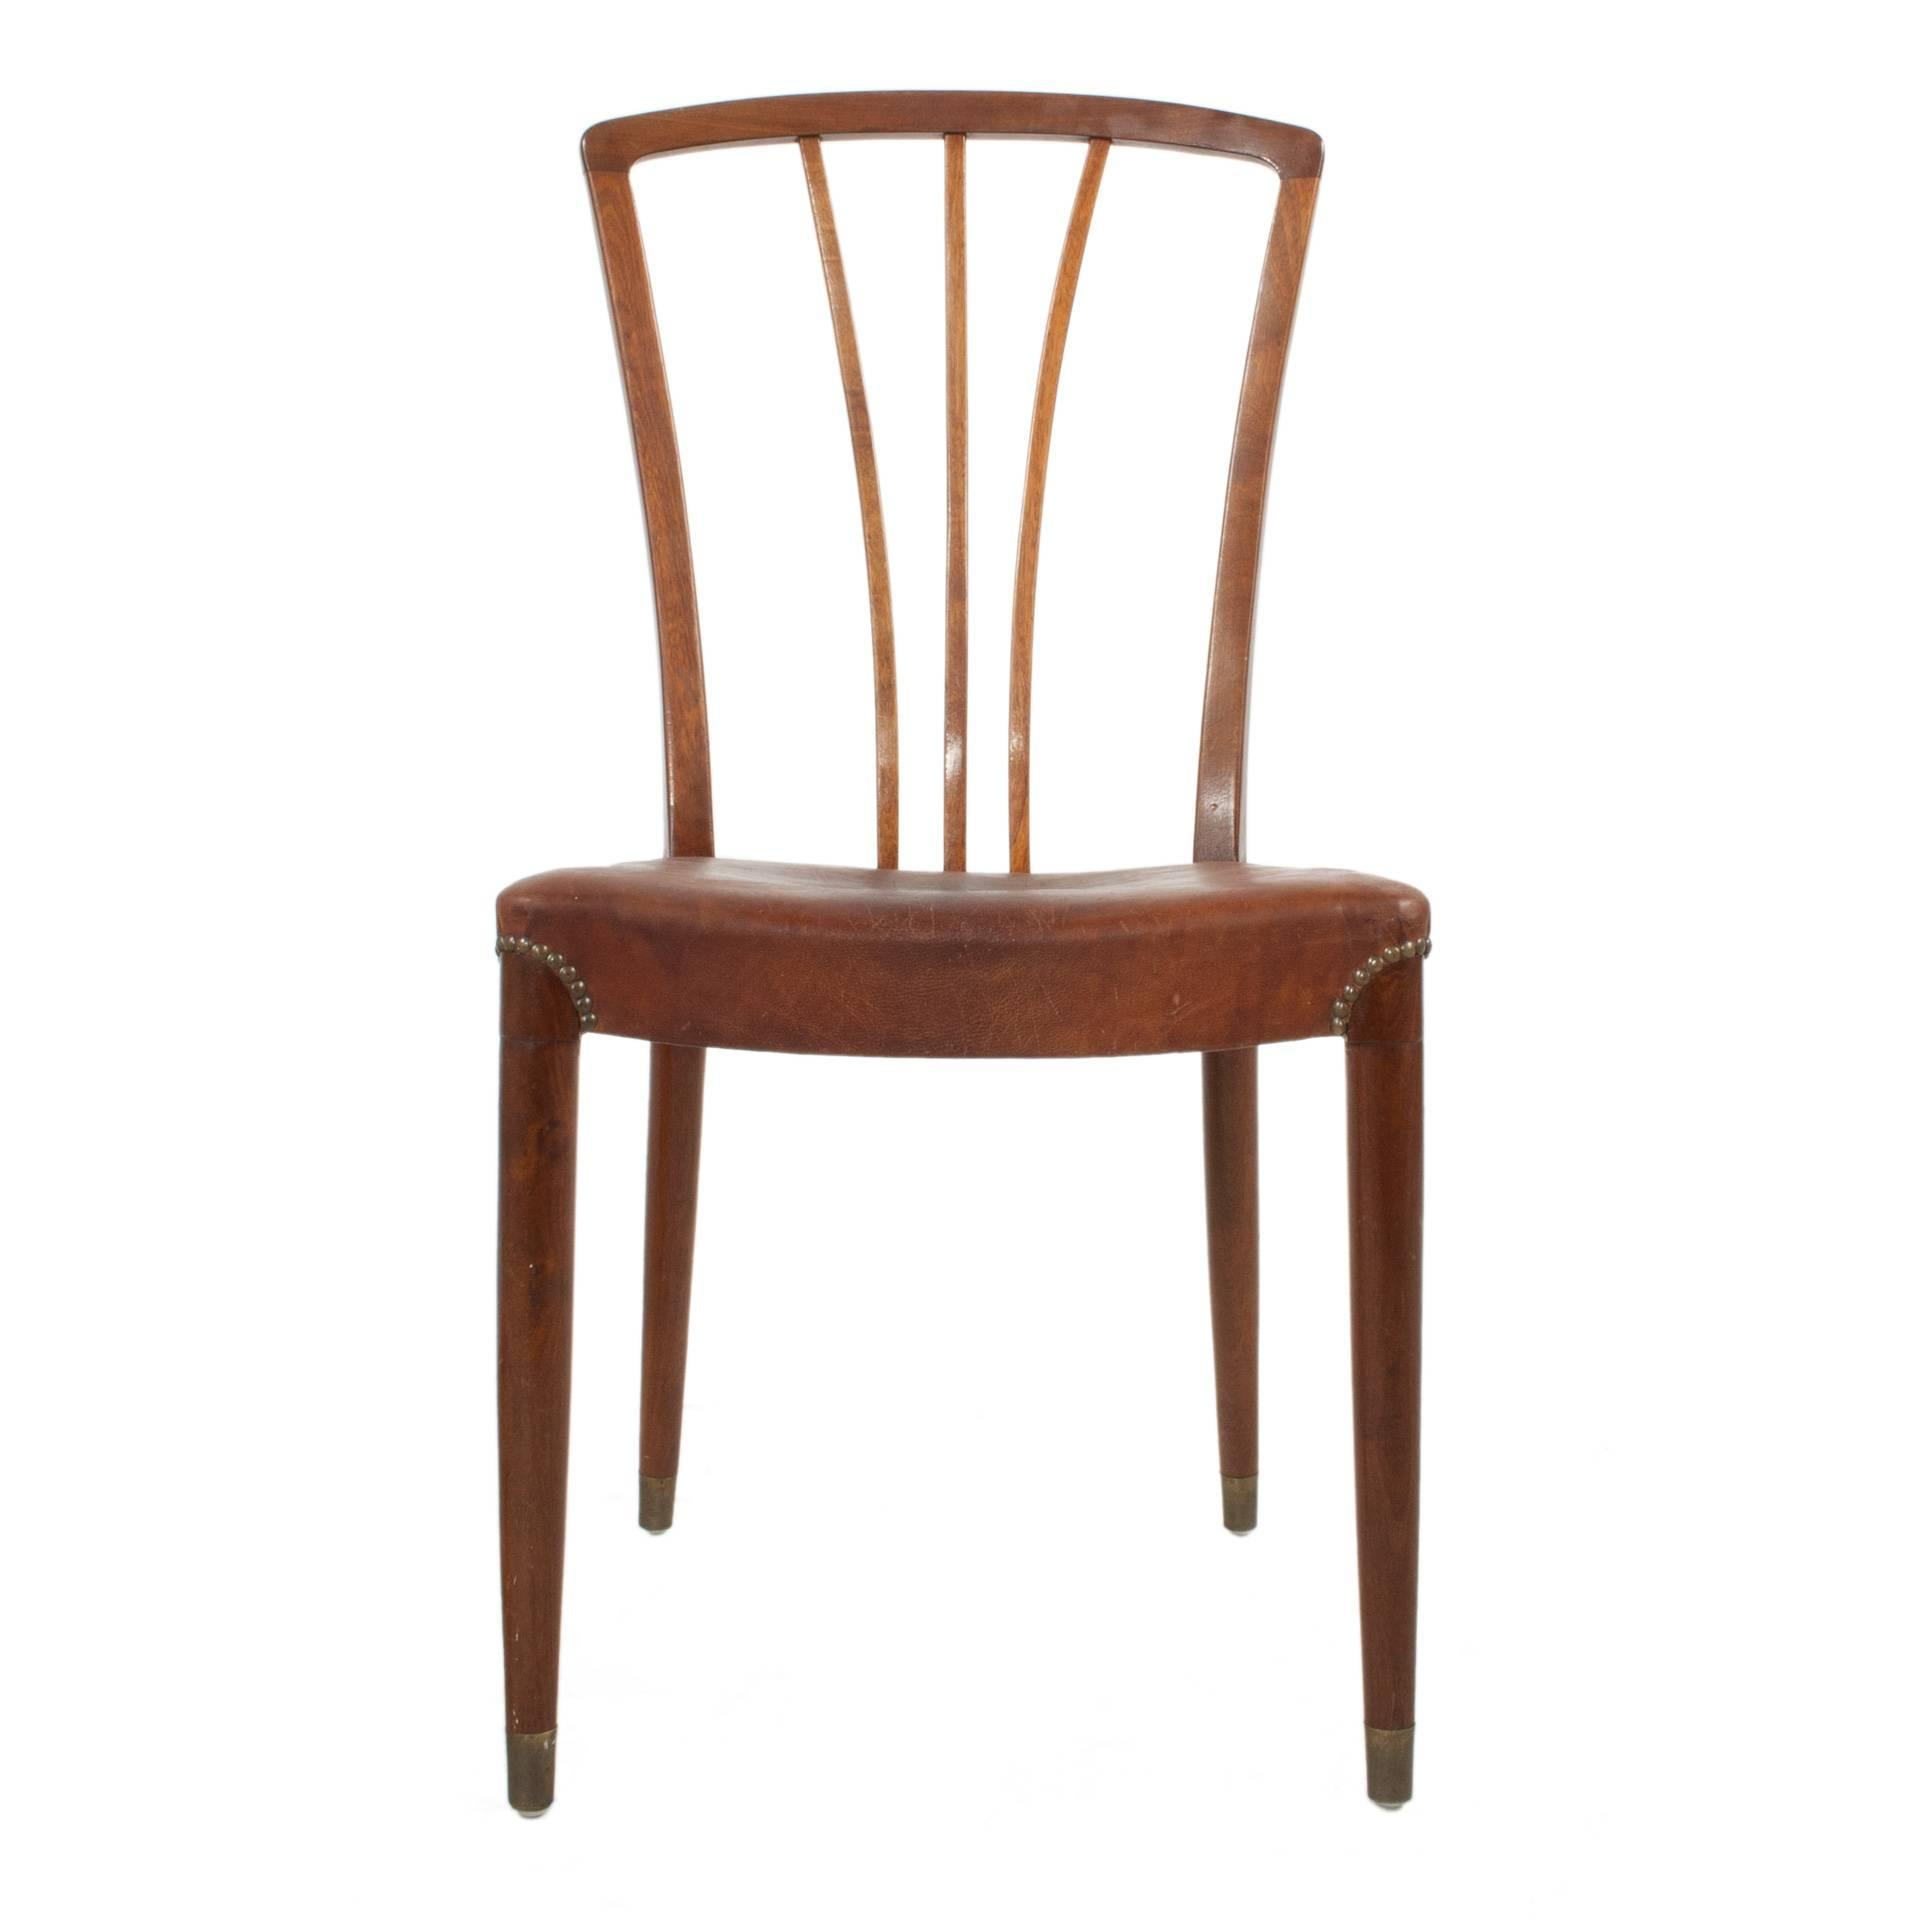 Mid-20th Century Set of Ten Leather Dining Chairs